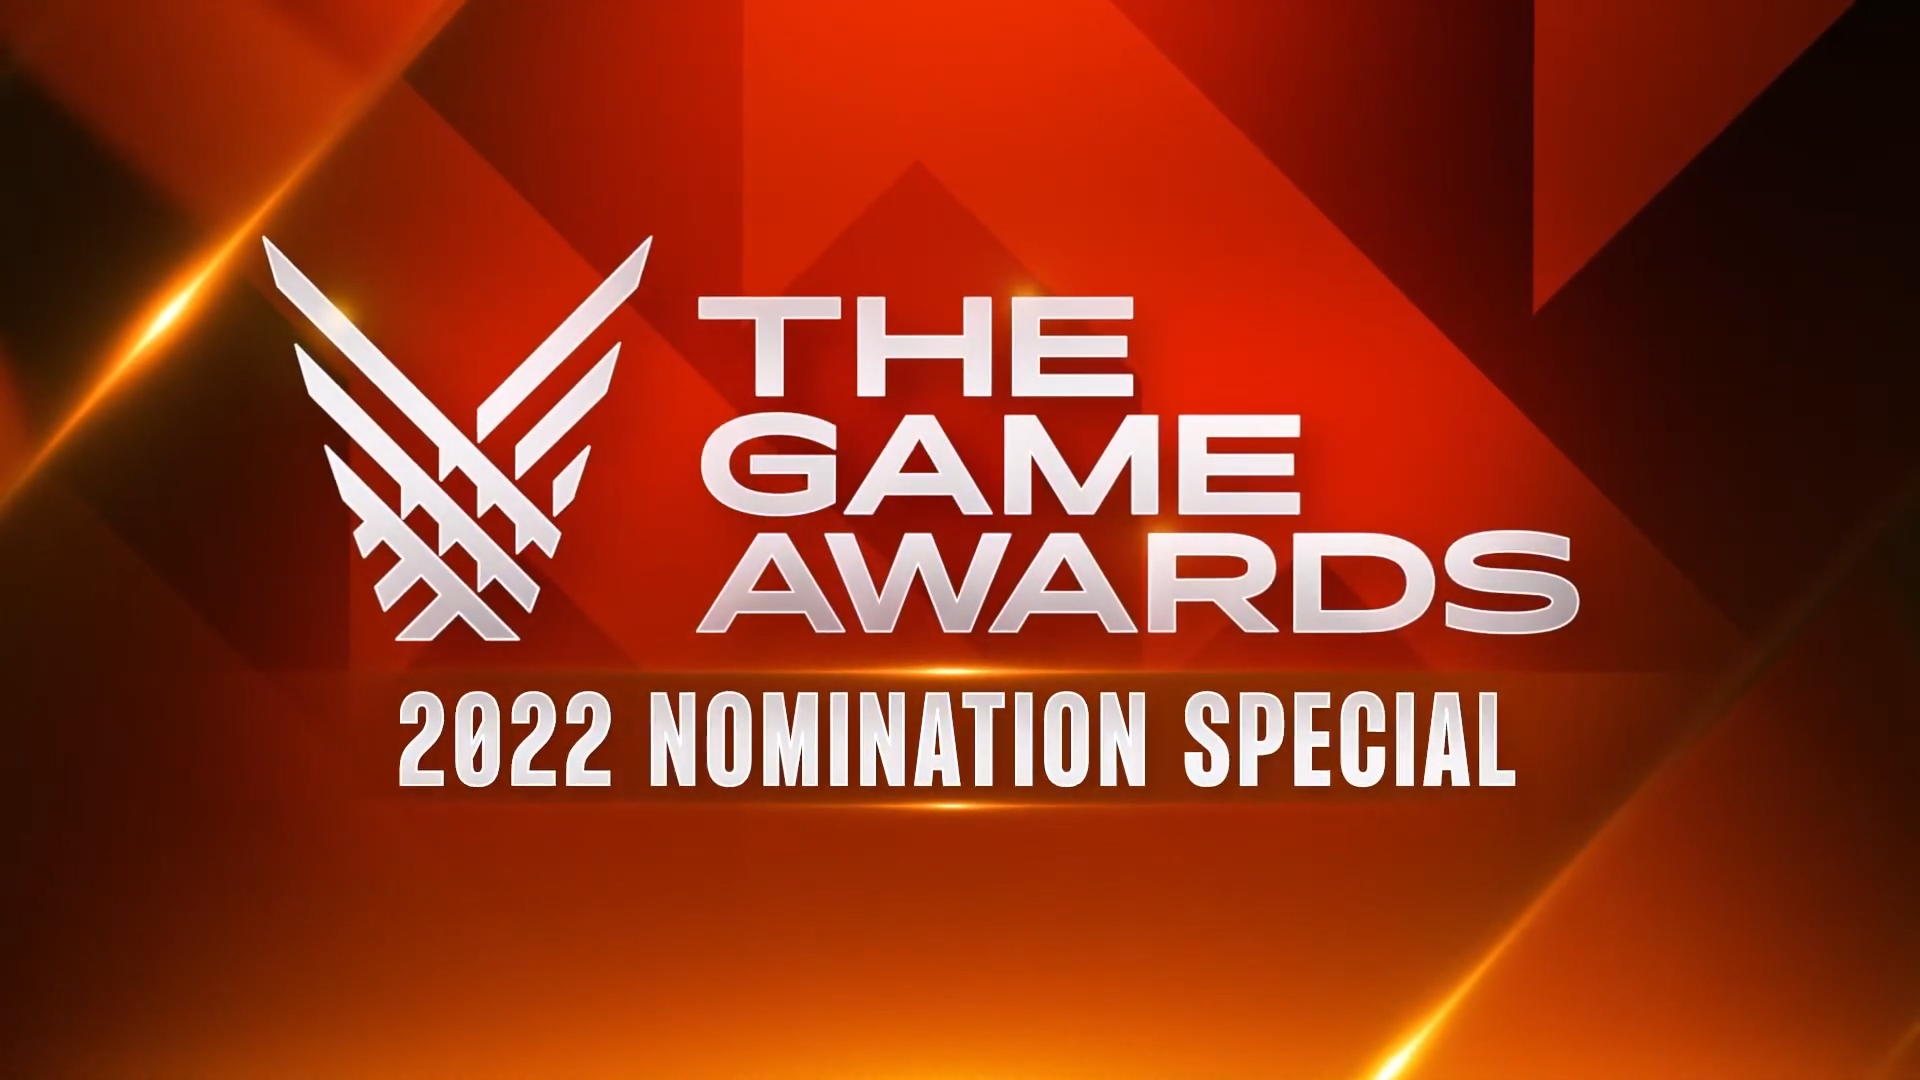 THE GAME AWARDS: 2022 with Geoff Keighley, Which Nominee will Win Game of  The Year?